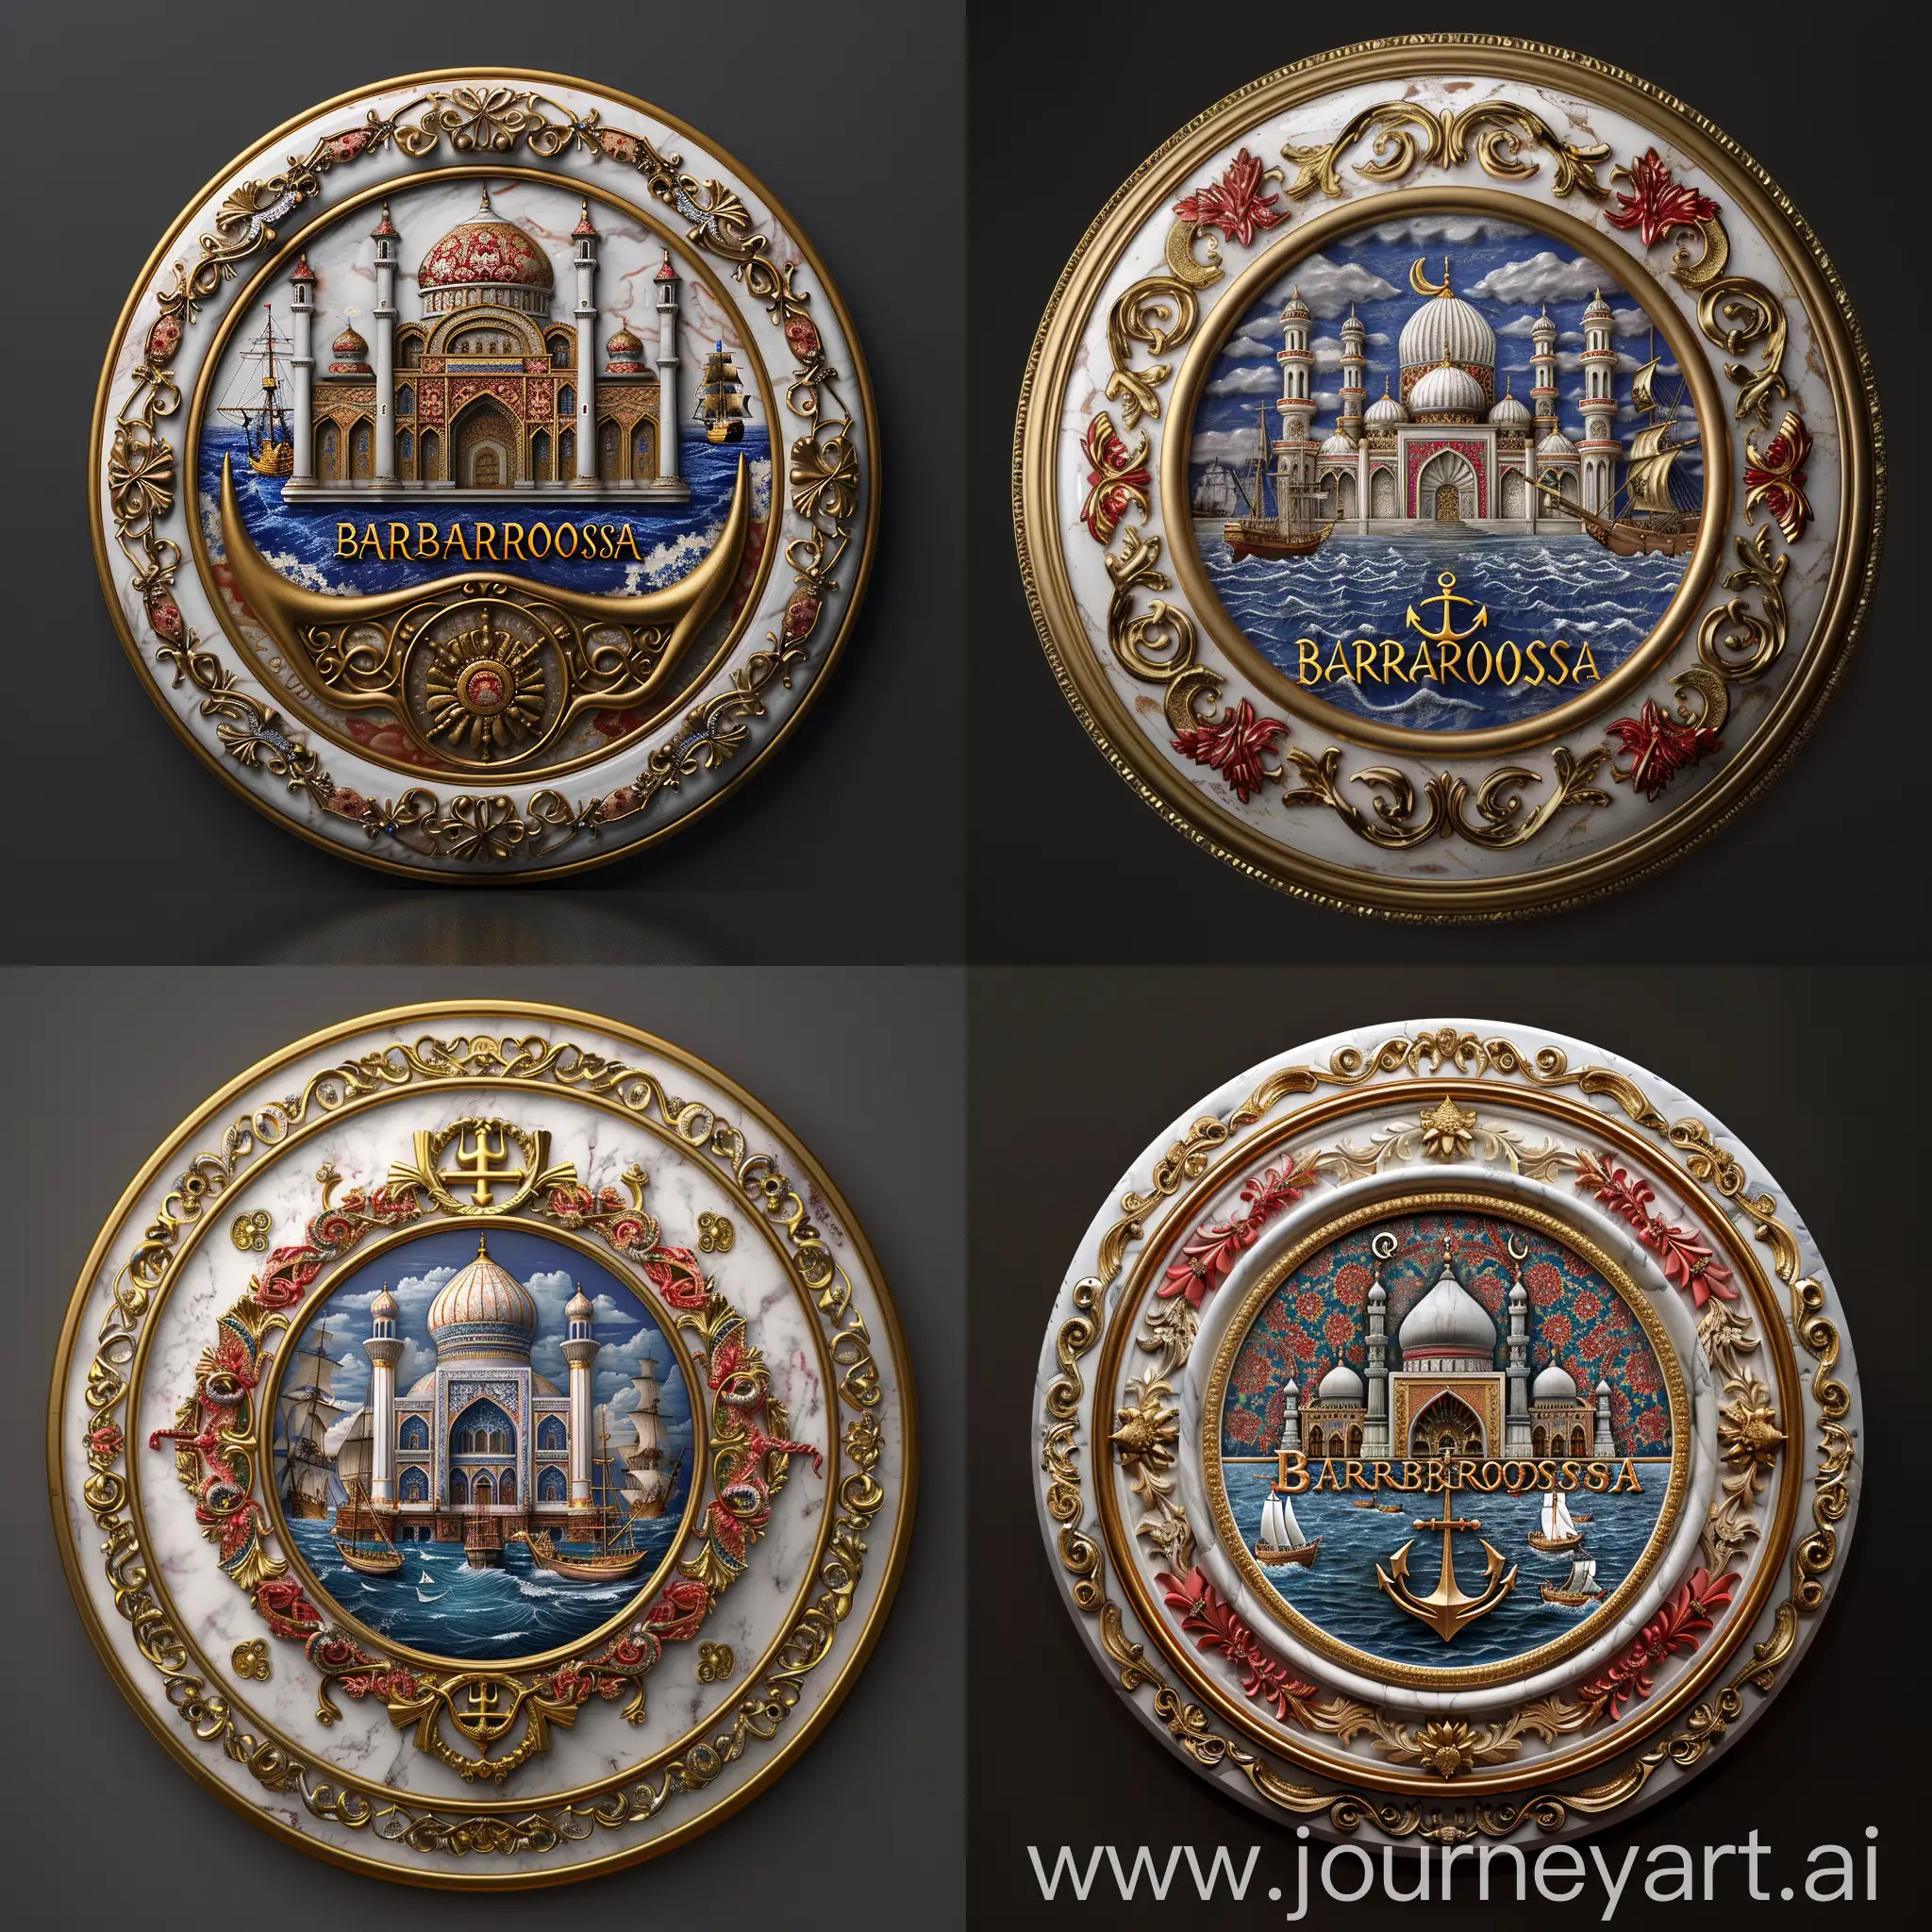 "BARBAROSSA" written on a Round white marbled porcelain pirates medallion, depicting Persian mosque beyond sea with ships, Symmetric front perspective, solid red blue Persian floral design and golden arabesque embossed on white marbled border, 3d Naval symbols, shiny gold framed, 3d pirates styled medallion --sref https://cdn.discordapp.com/attachments/1213041174428782623/1221545440881672252/image_9jnnmm.png?ex=662ea758&is=661c3258&hm=64547b1a711bc0e60d7bed72683f5b3f279c27c147cb59ae86a08f55b02a7243& --sw 1000